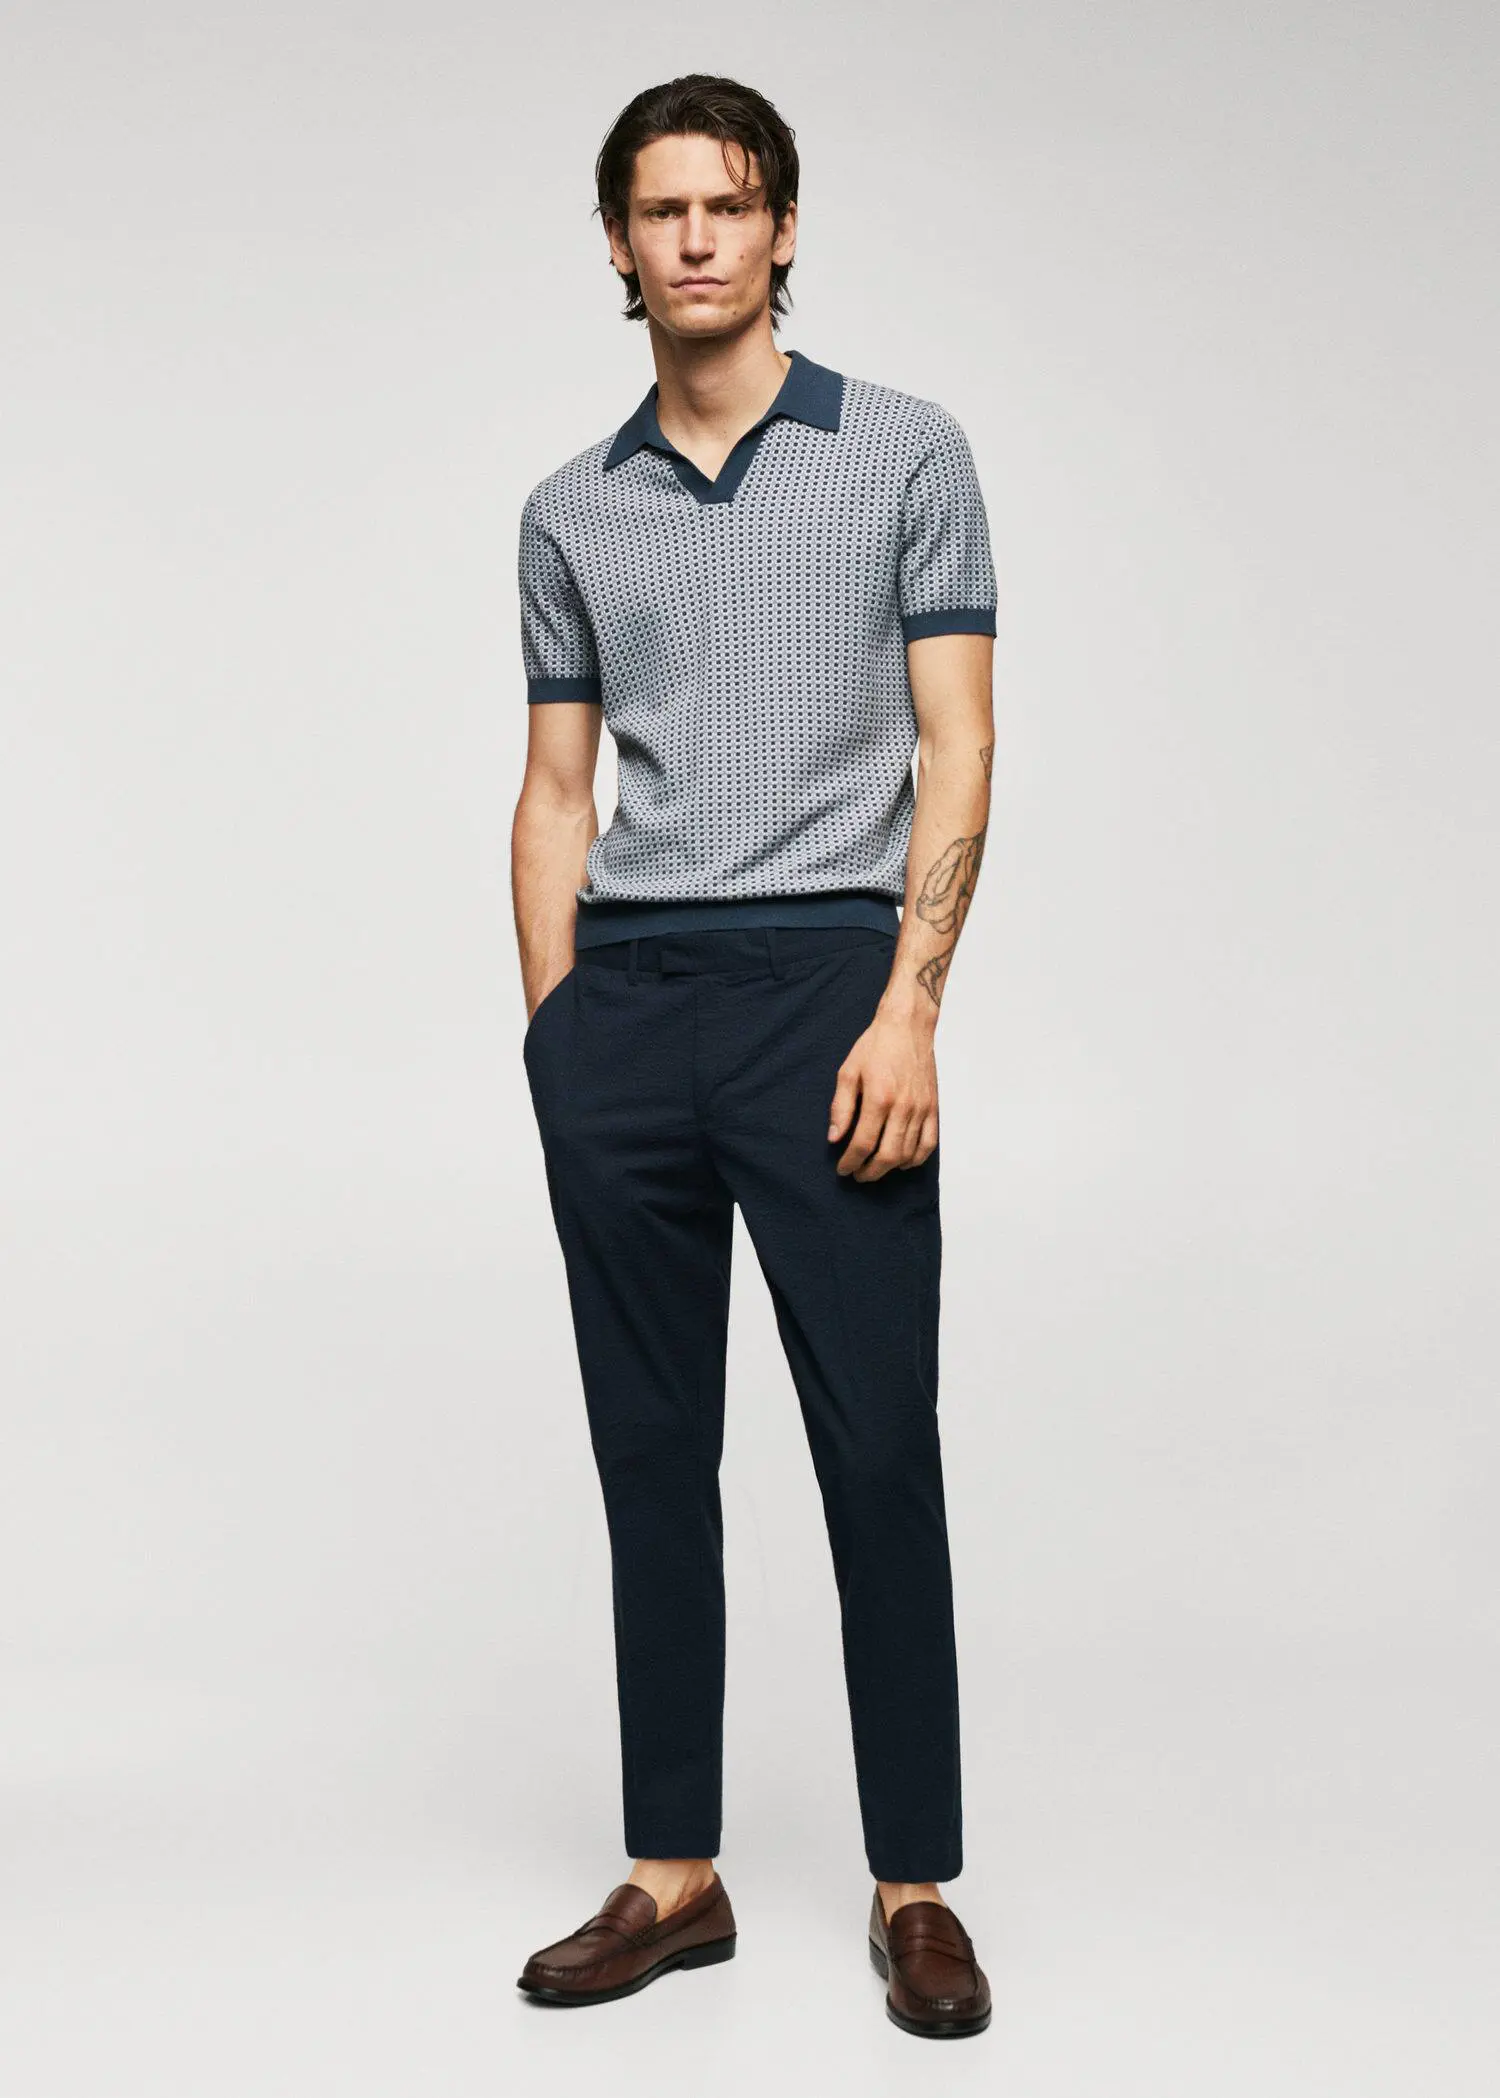 Mango Fine-knit polo shirt with geometric structure. a man in a gray and blue shirt and black pants. 